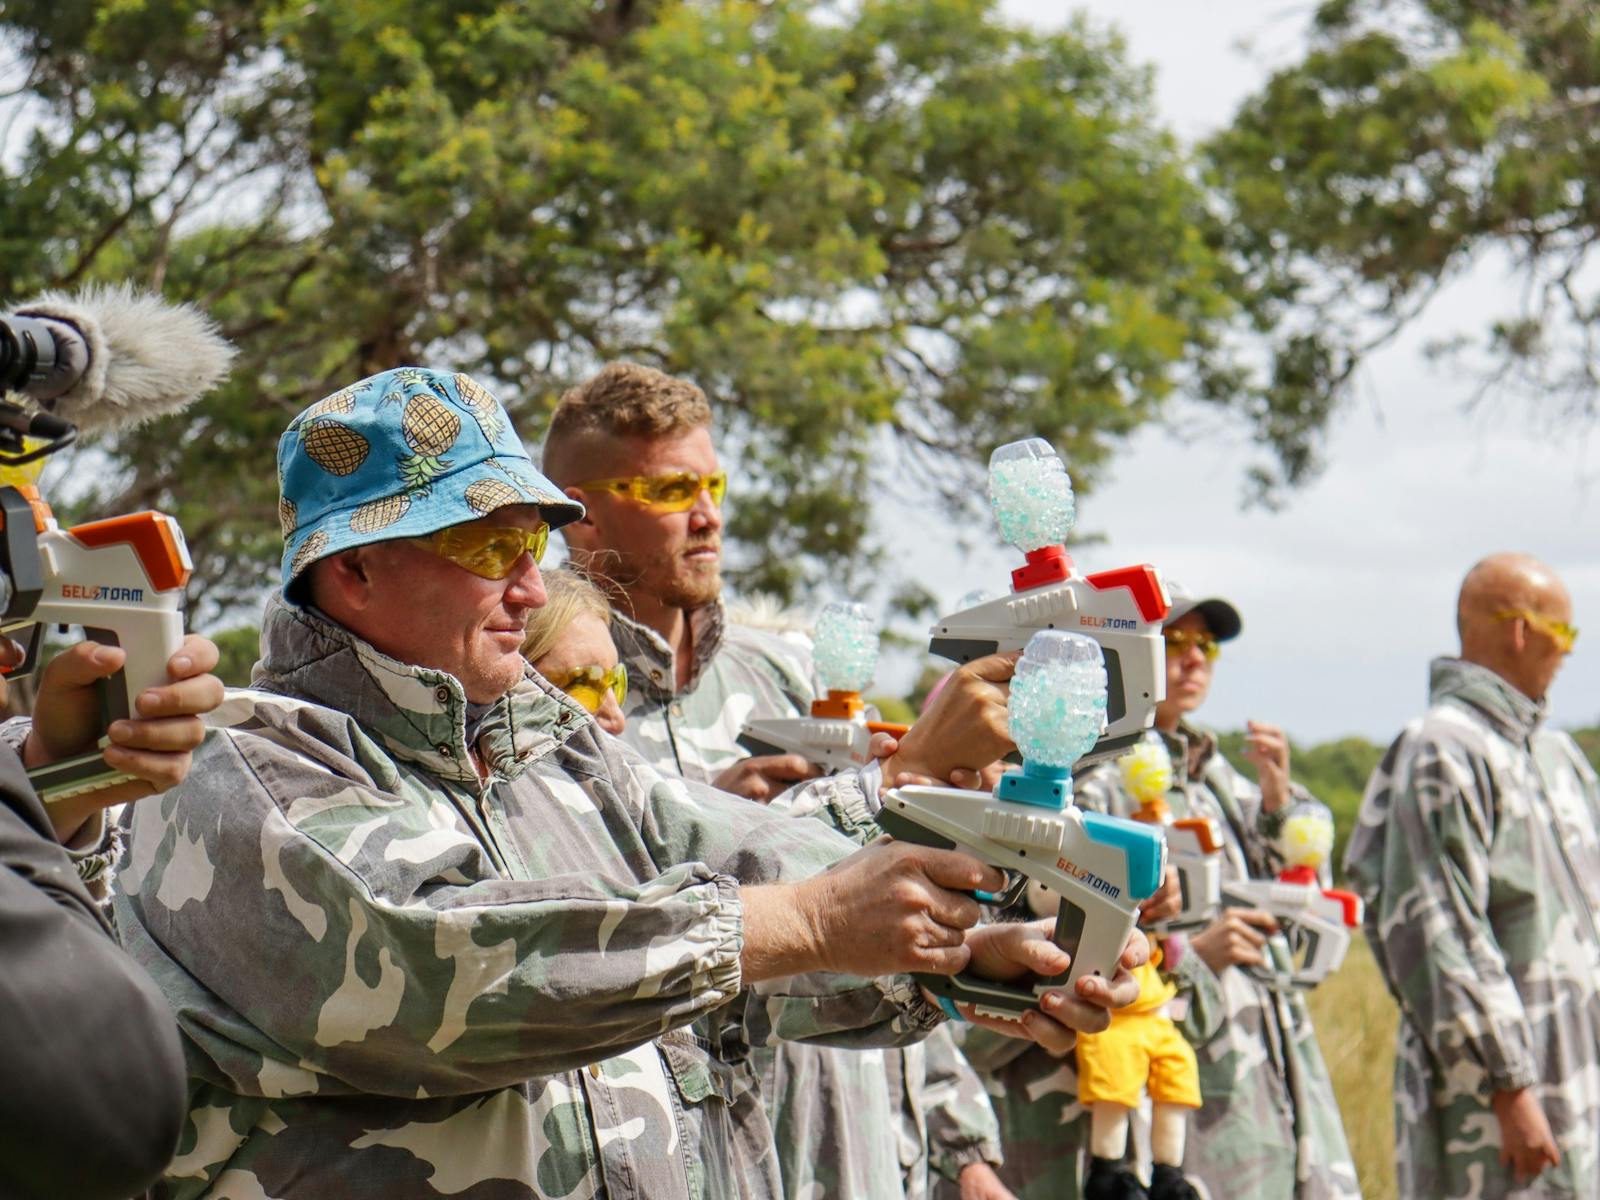 Everyone has a good time at Freycinet Paintball & Campground